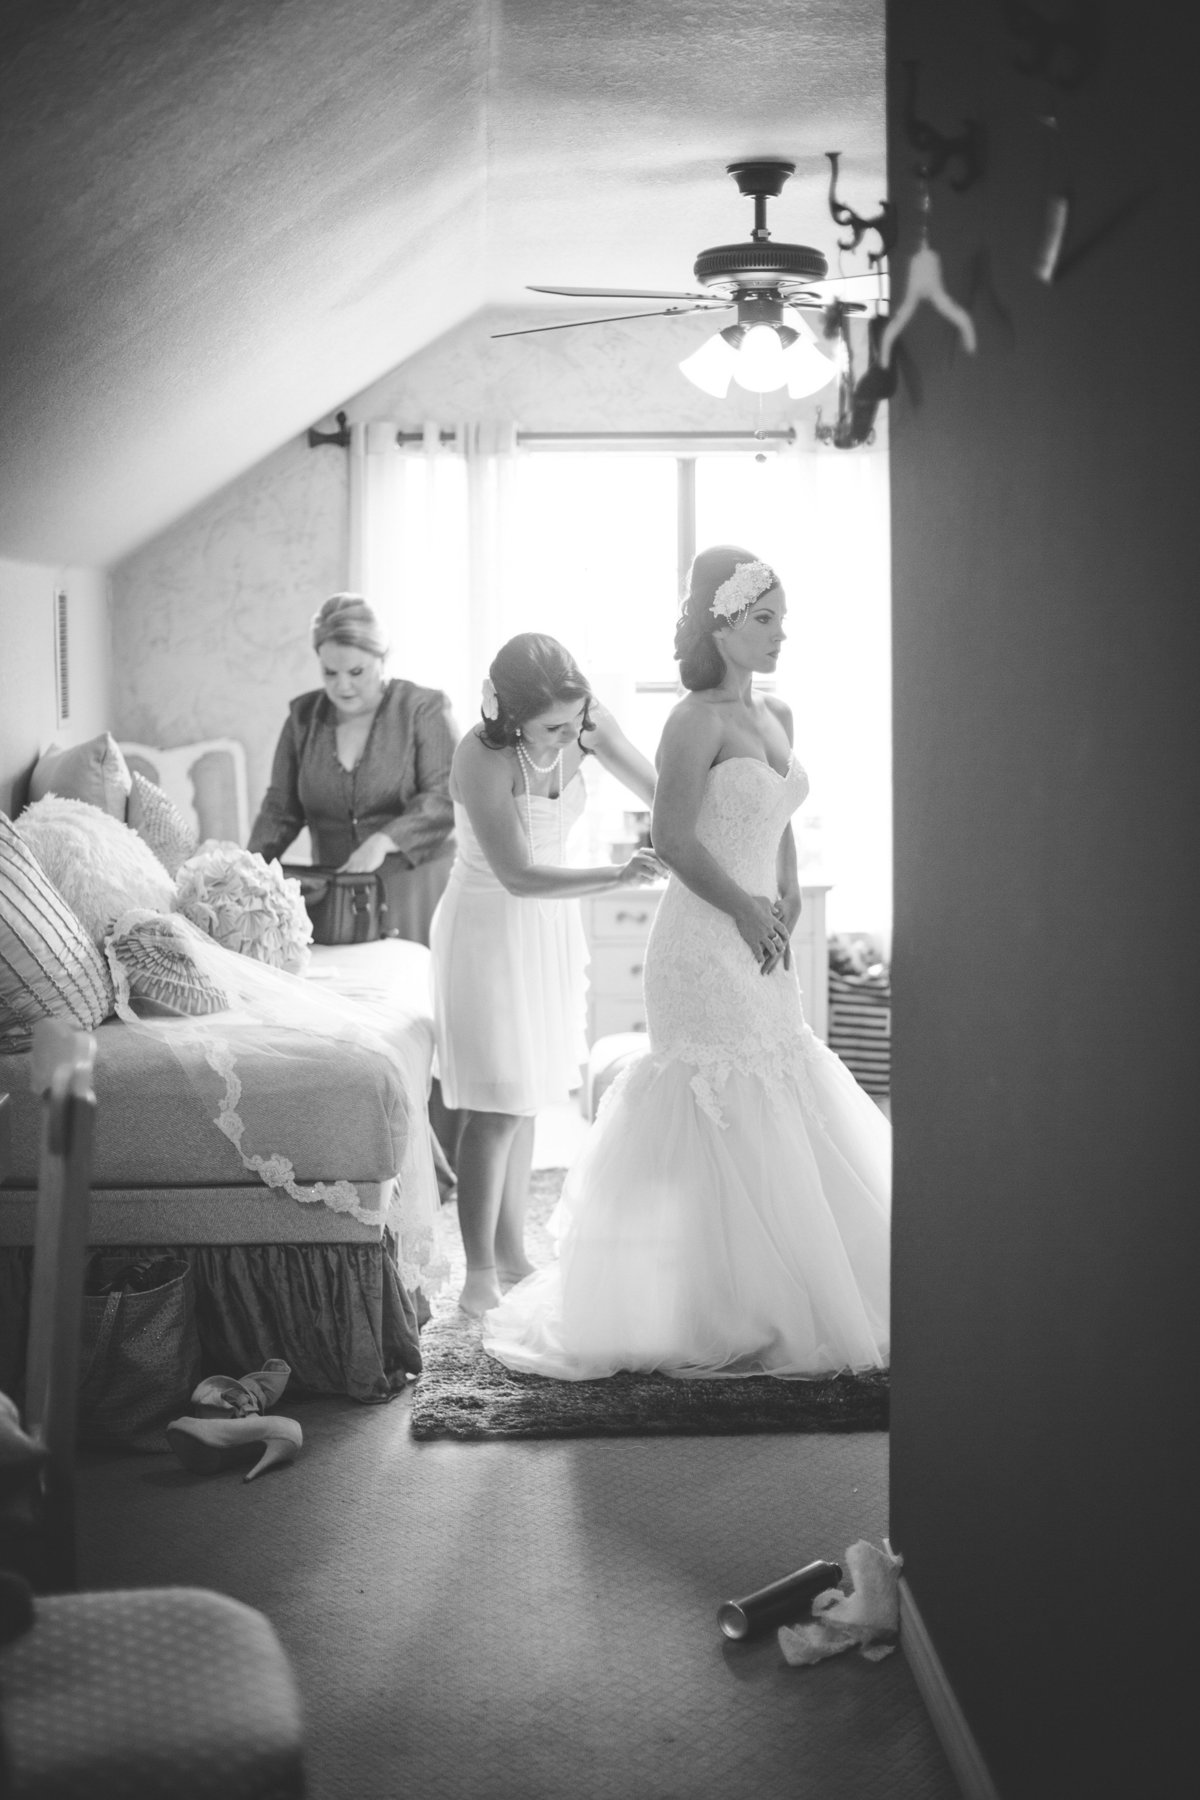 Bridesmaids get bride ready before wedding ceremony at Vista west ranch in Texas Hill Country wedding